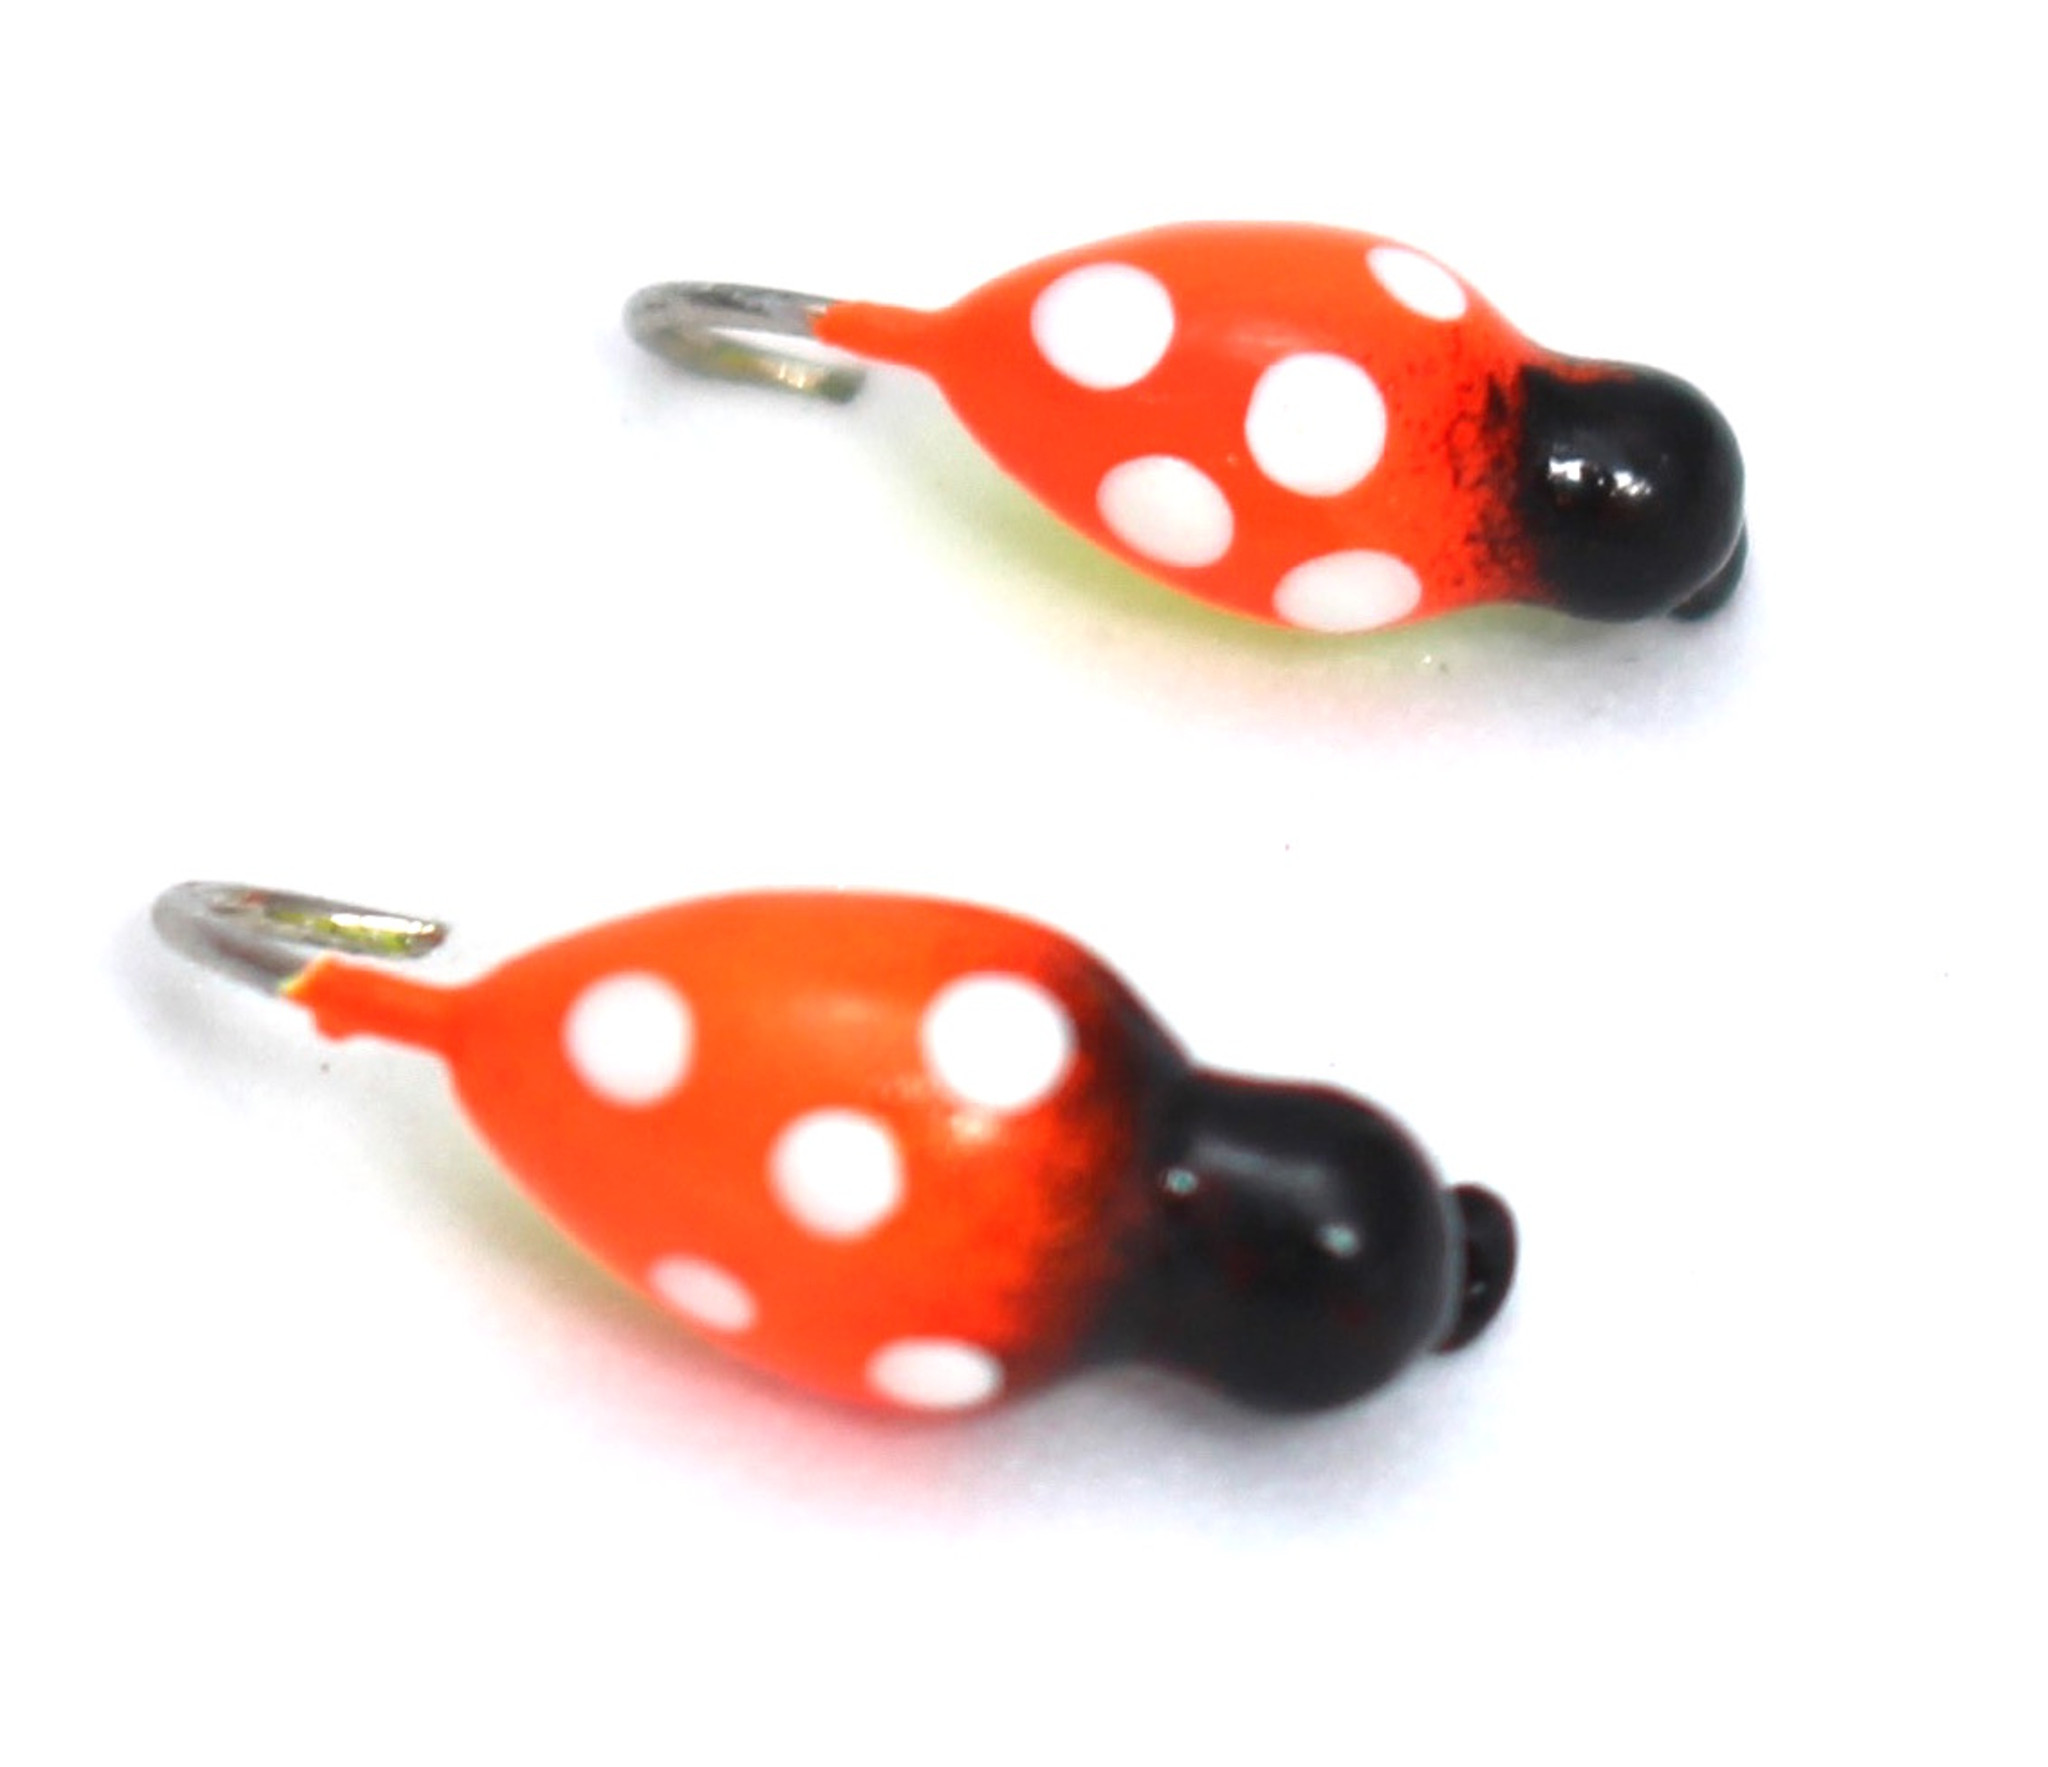 Tungsten Lucky Lady - Widow Maker Lures